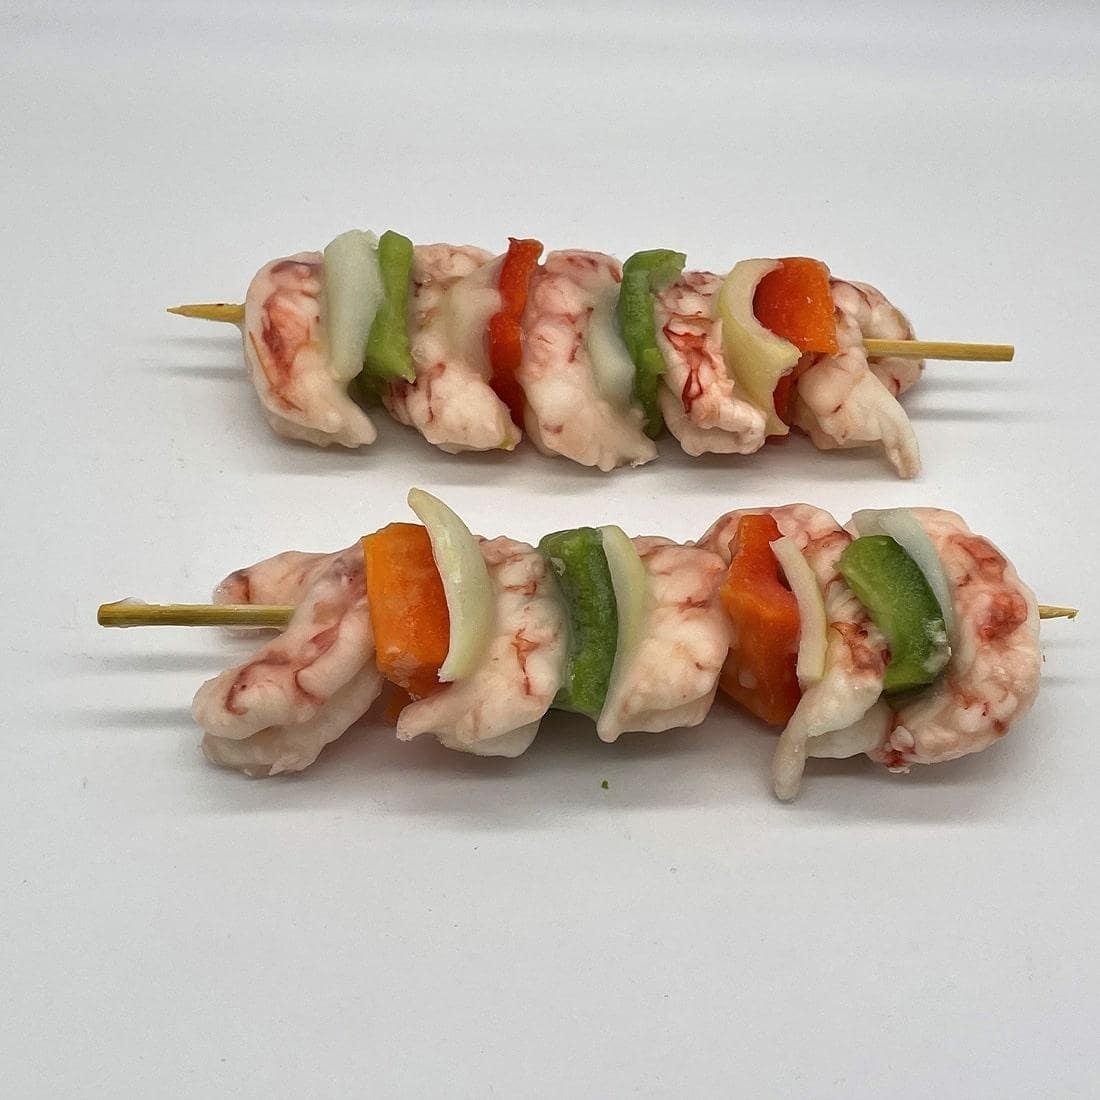 Shrimp and Vegetable Skewers - Cover Image